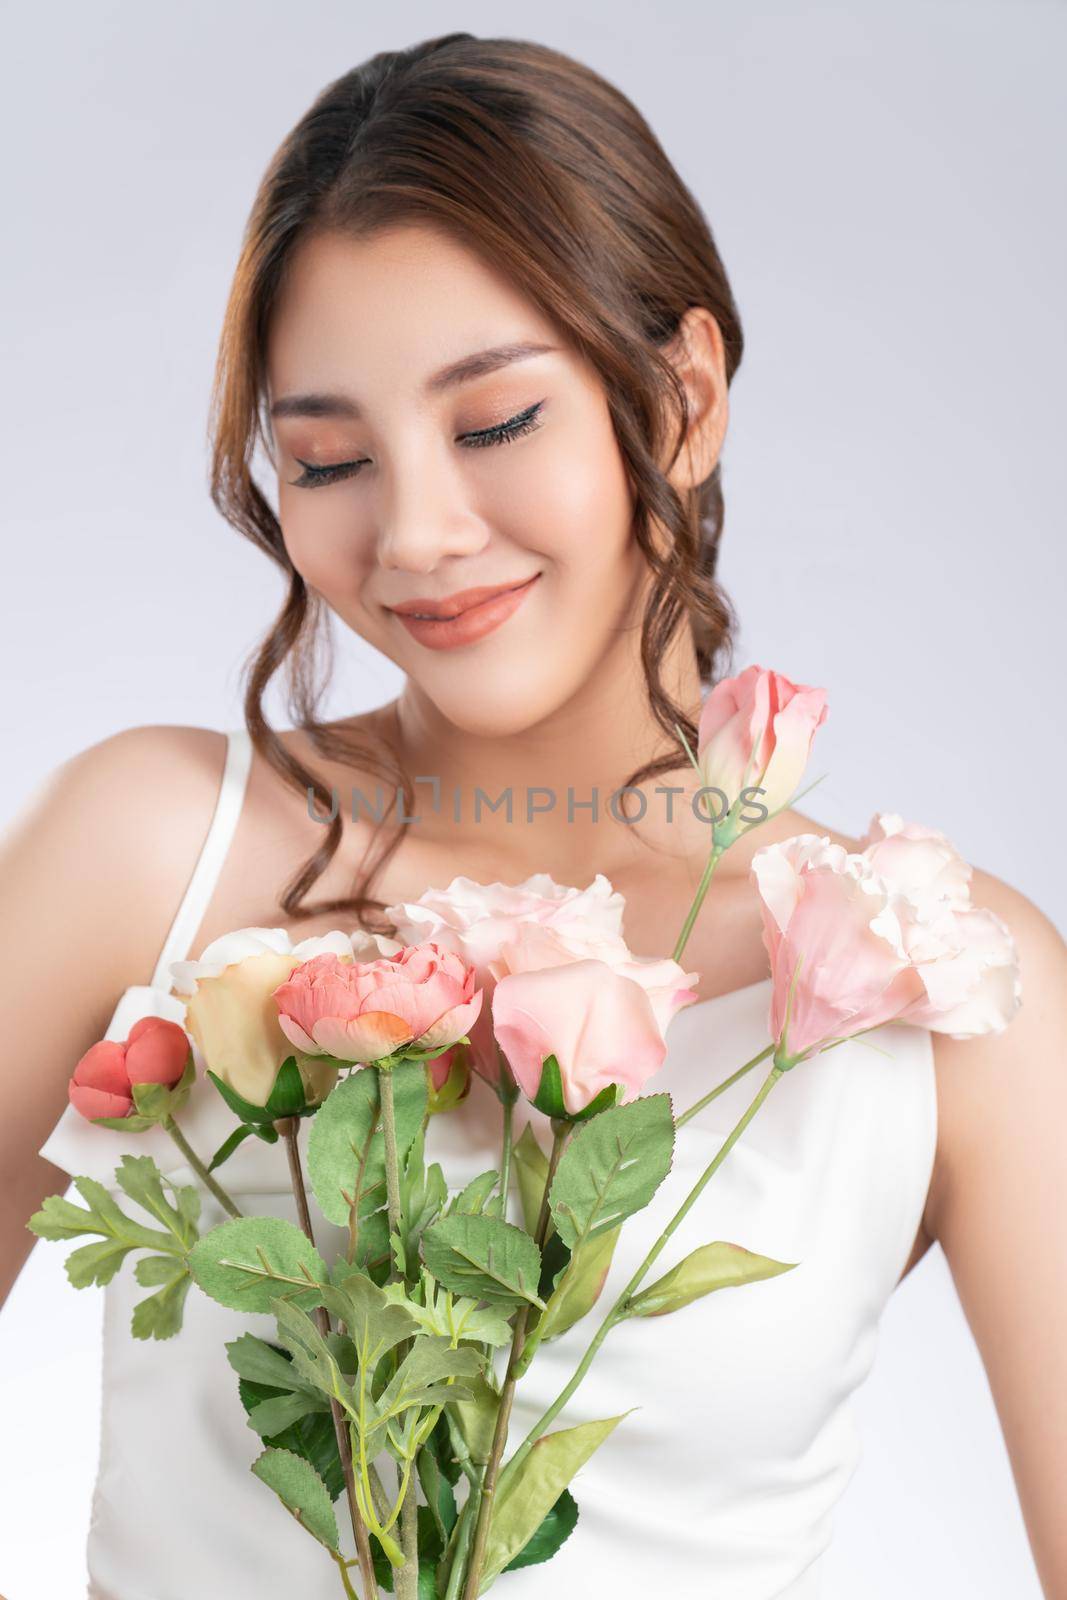 Closeup gorgeous female model with fair skin and perfect makeup holding flowers. by biancoblue